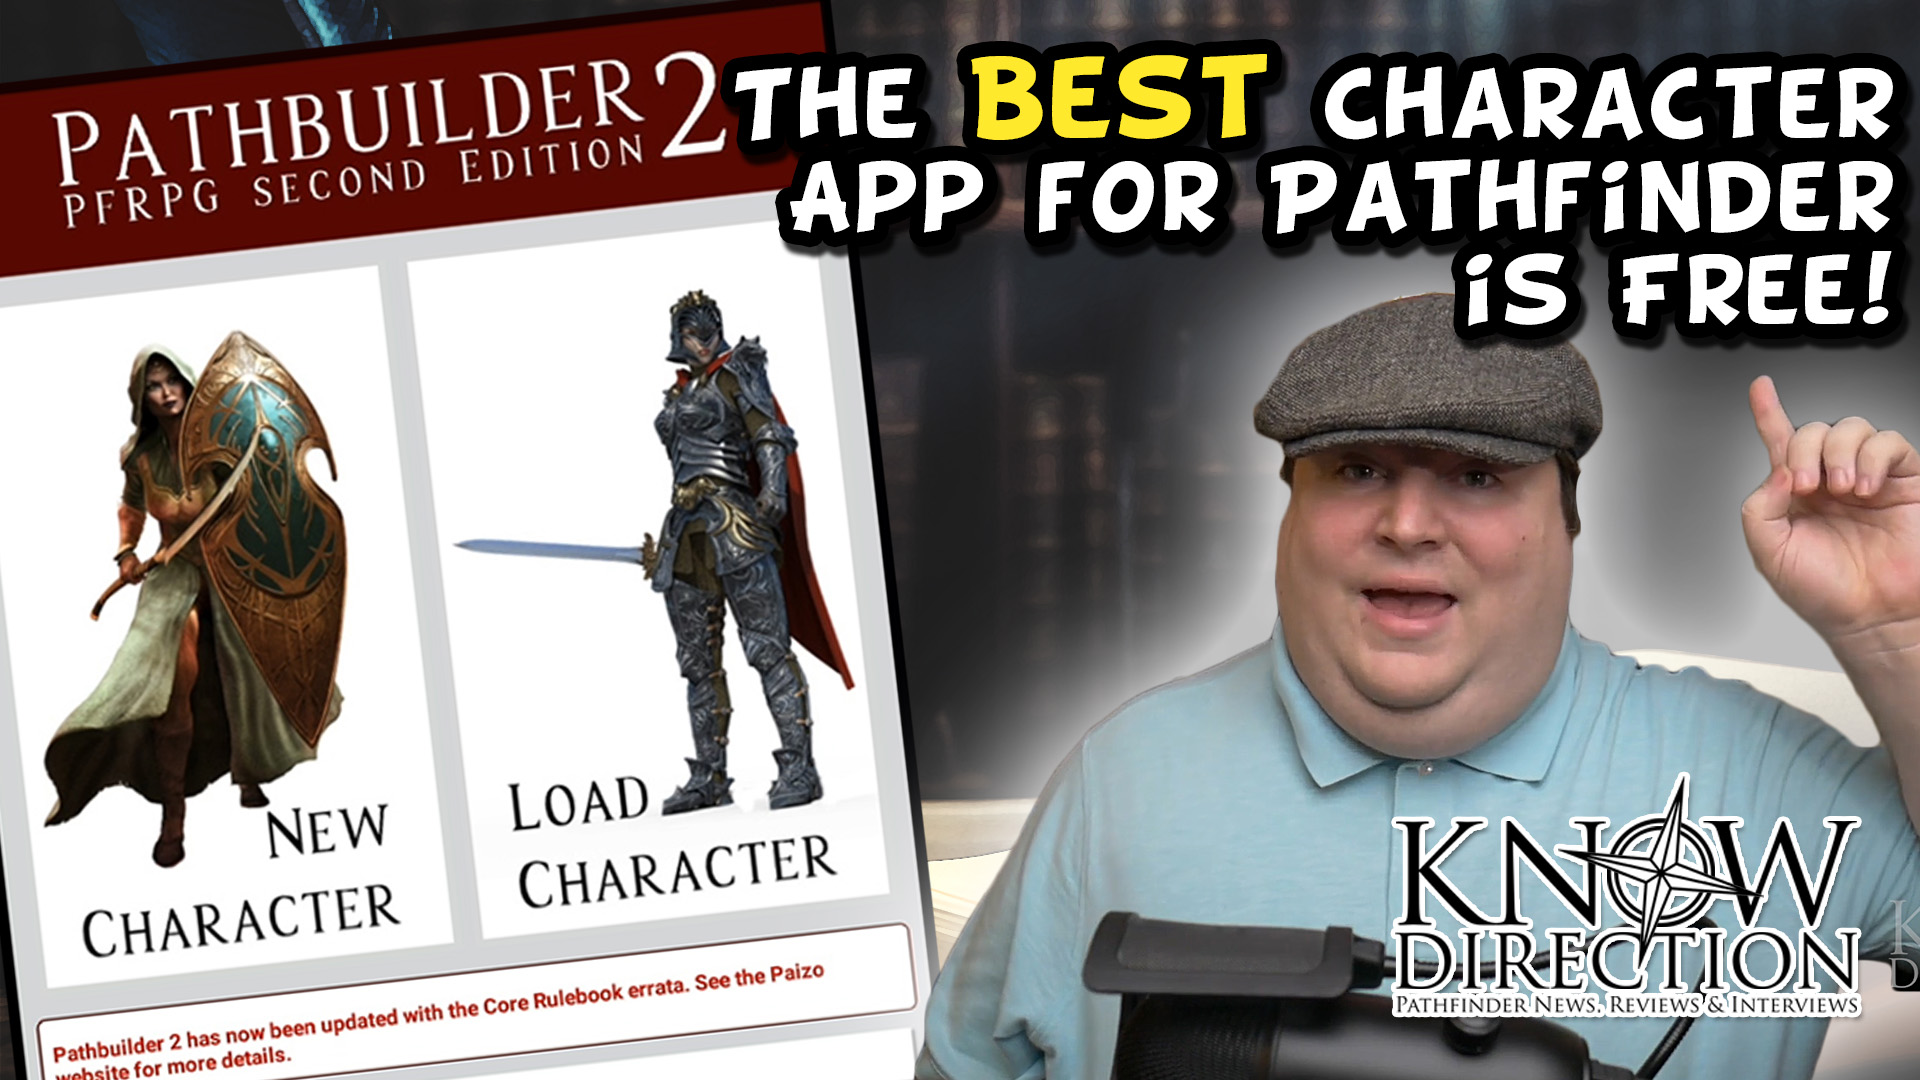 The Best App for Pathfinder is Free! - Pathbuilder 2e Review